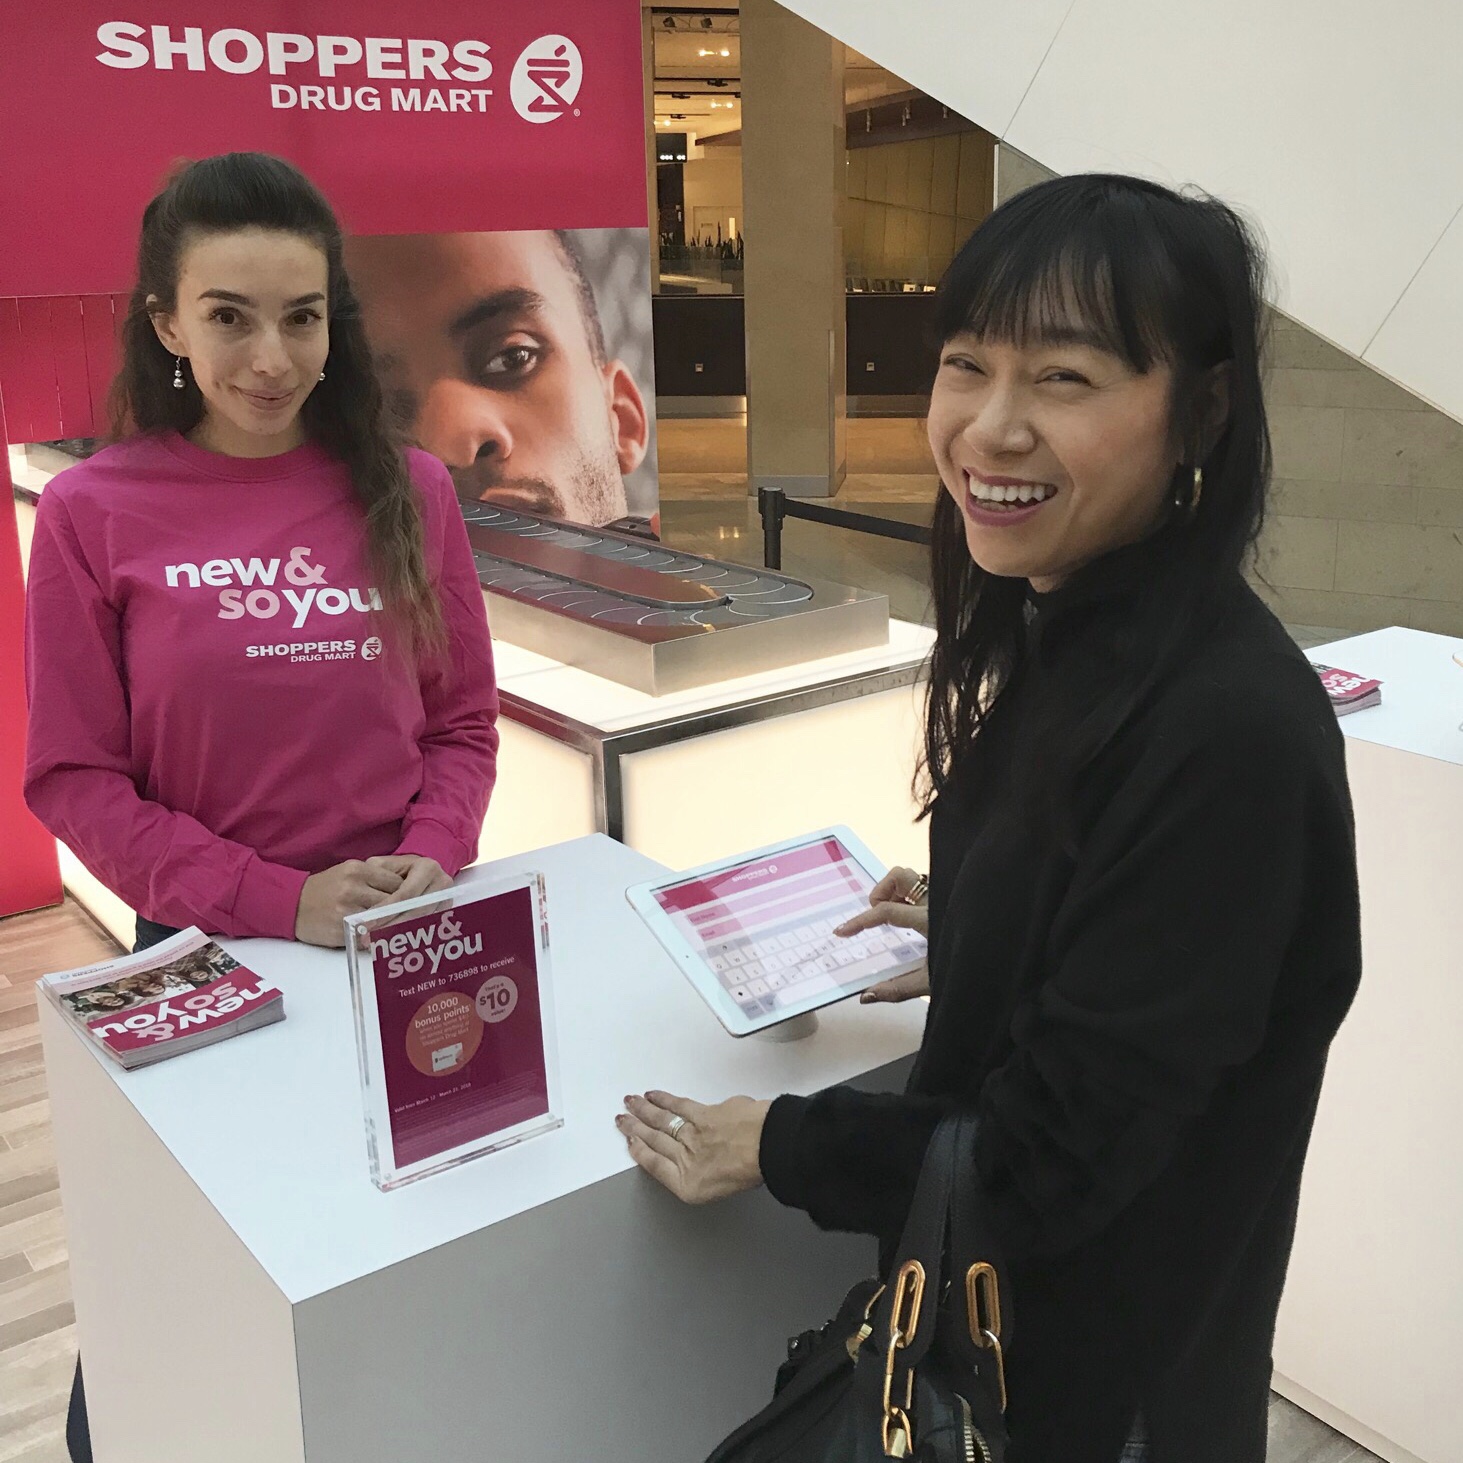 Shoppers Drug Mart New and So You